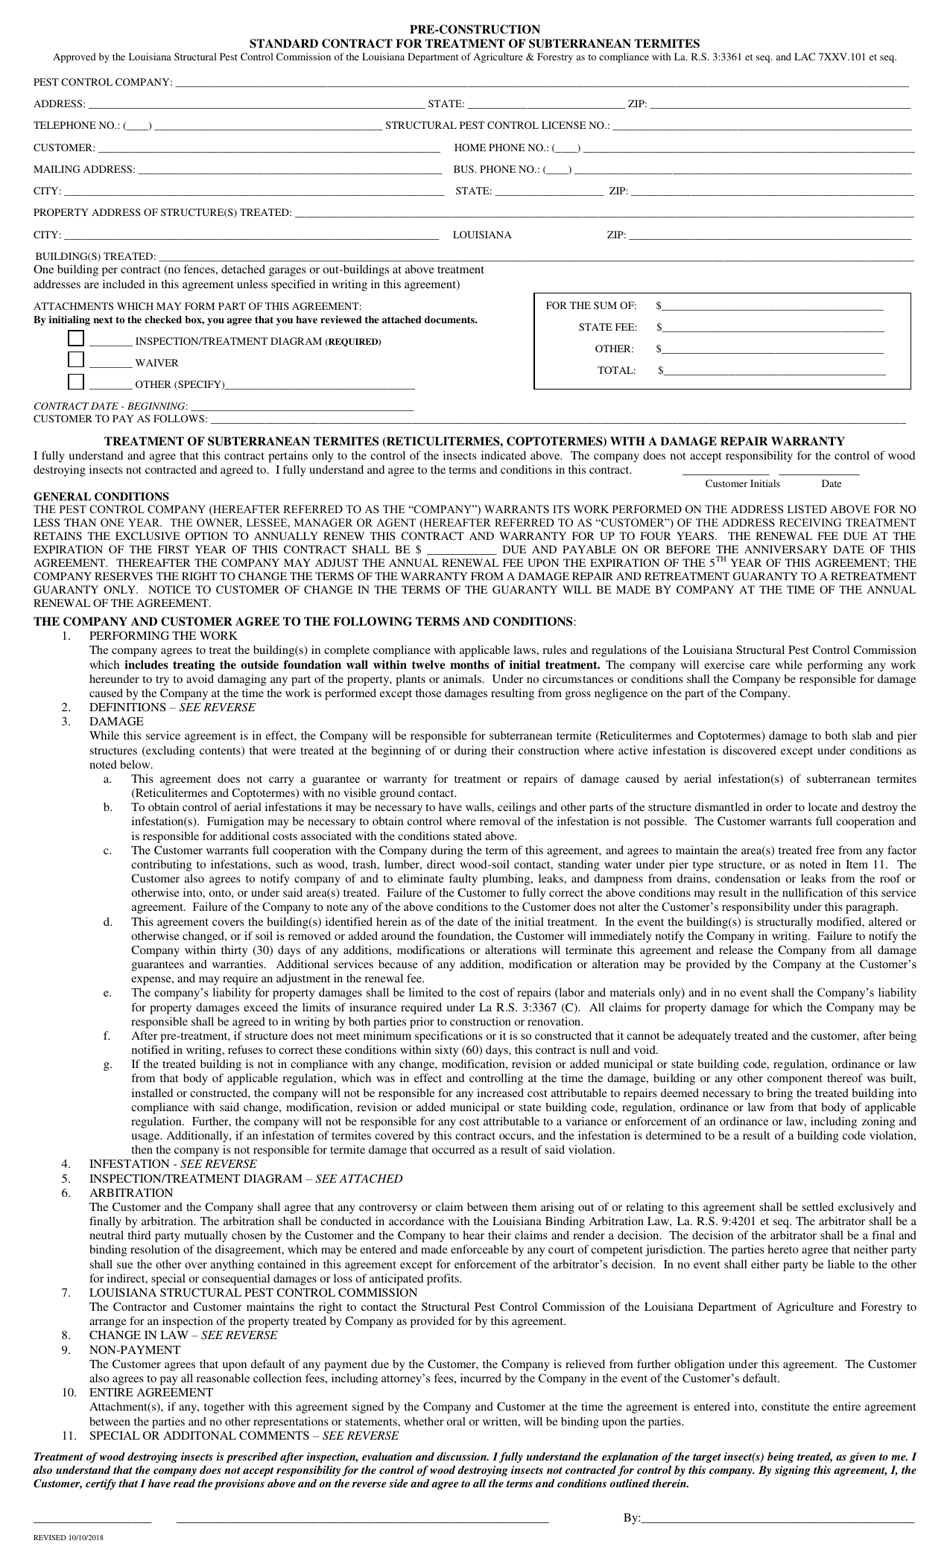 Pre-construction Standard Contract for Treatment of Subterranean Termites - Louisiana, Page 1